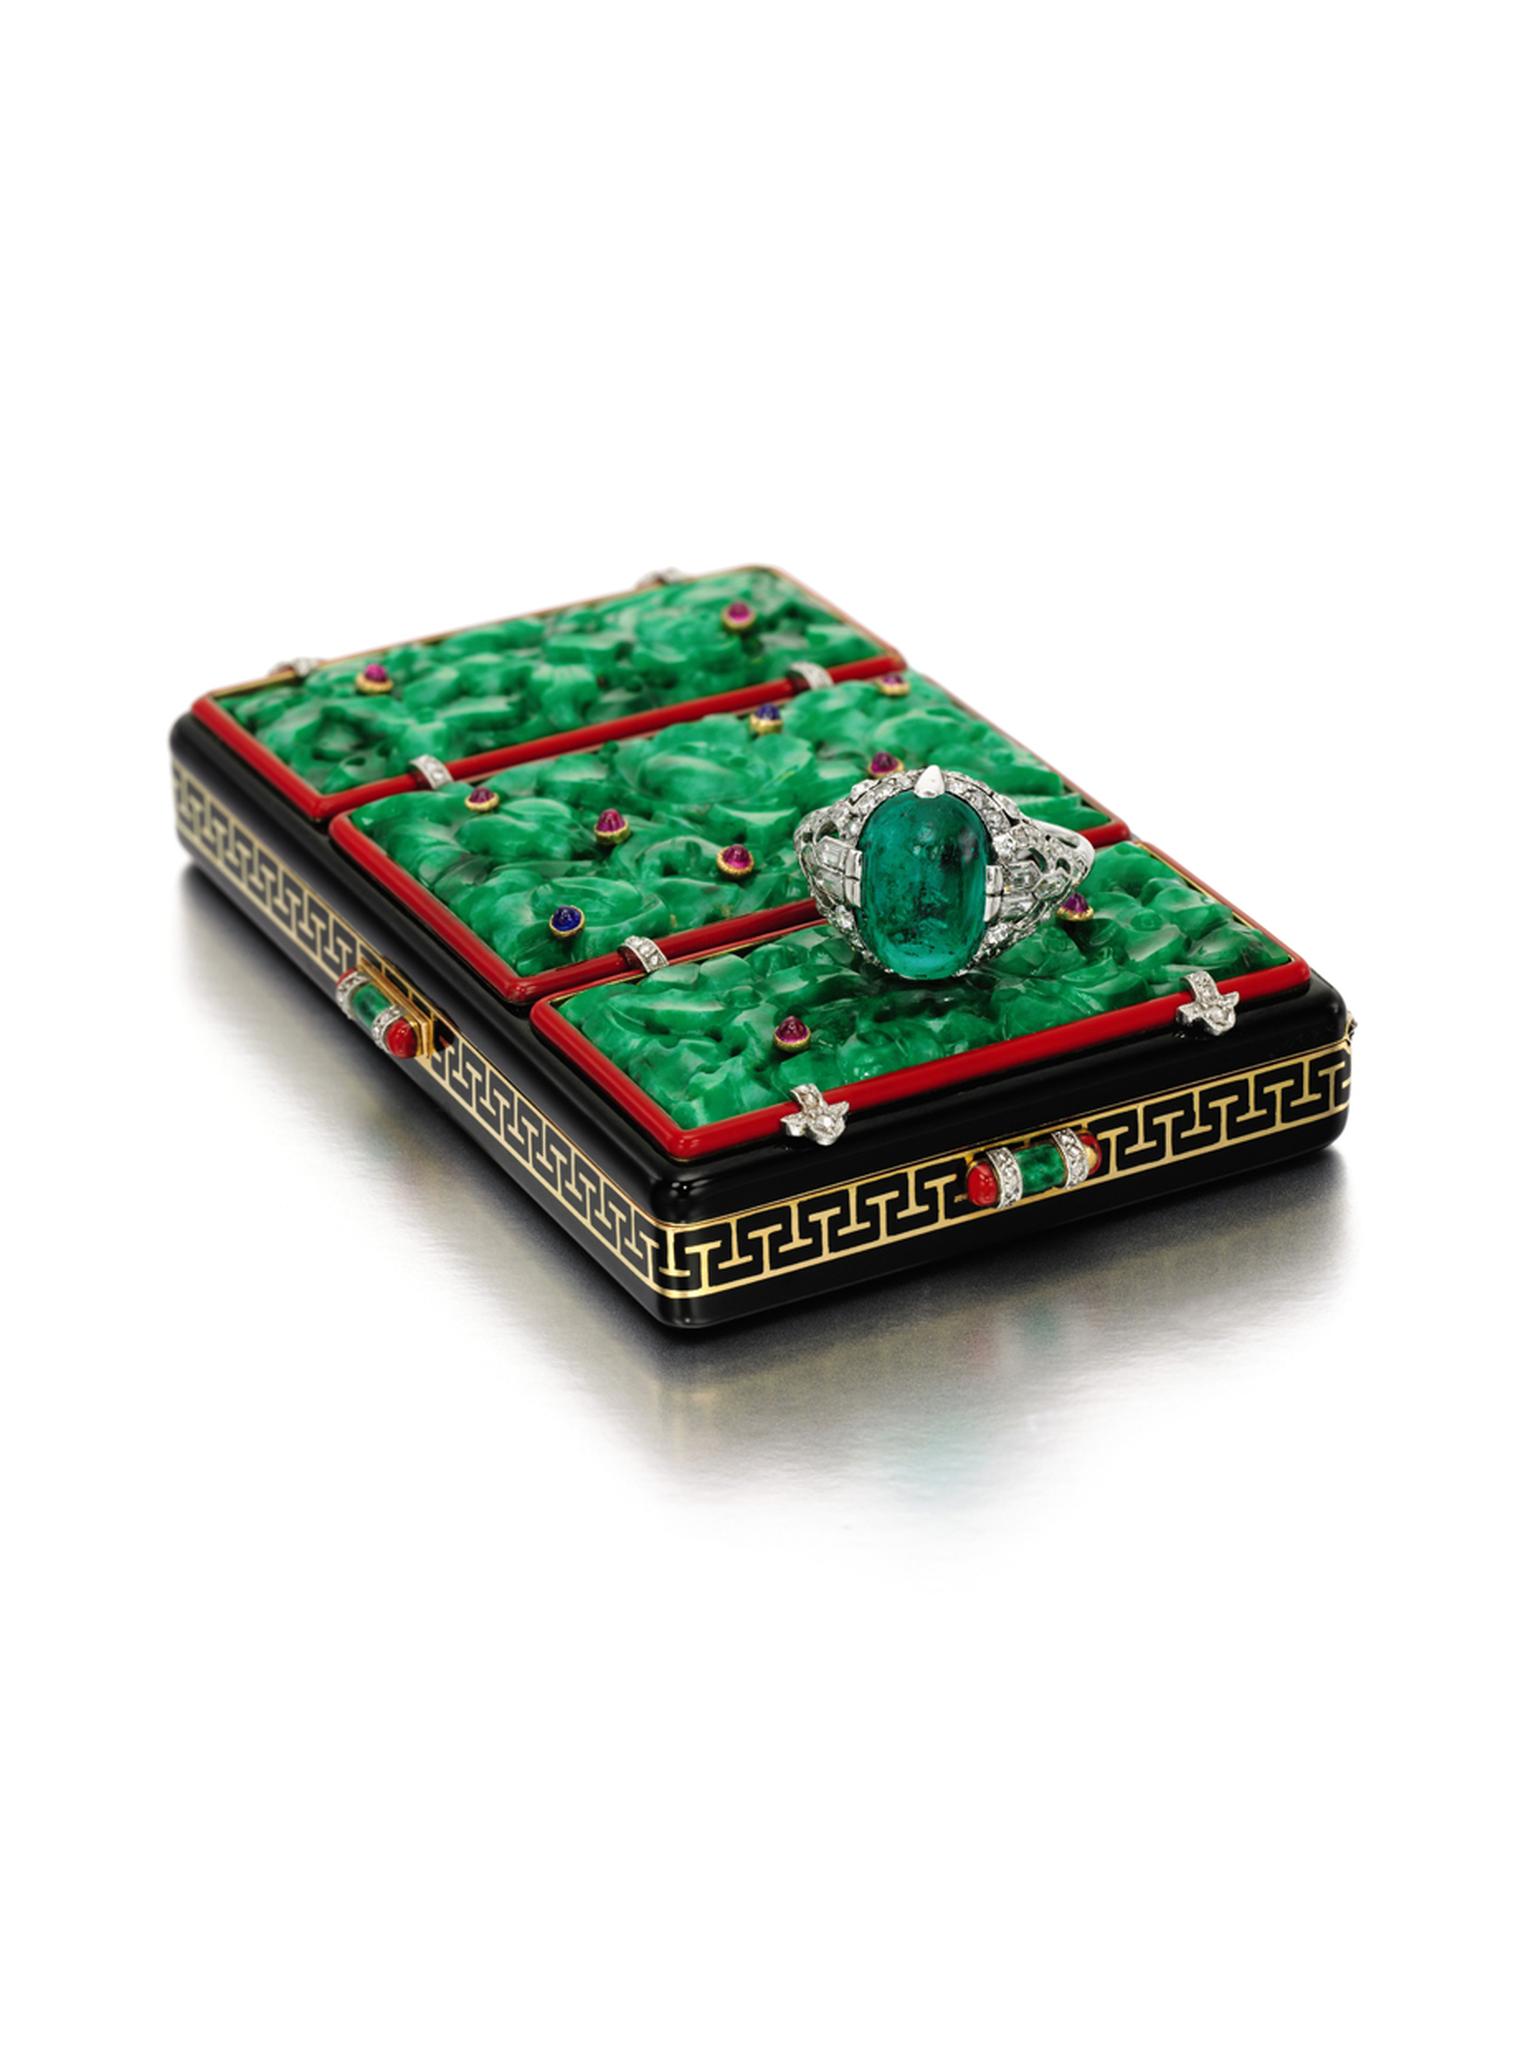 Lot 282, Lacloche Frères 1920s gem set, enamel and diamond vanity case, set with three carved jadeite plaques inset with cabochon sapphires and rubies up for auction at Sotheby's London. (estimate: £ 8,000-12,000).